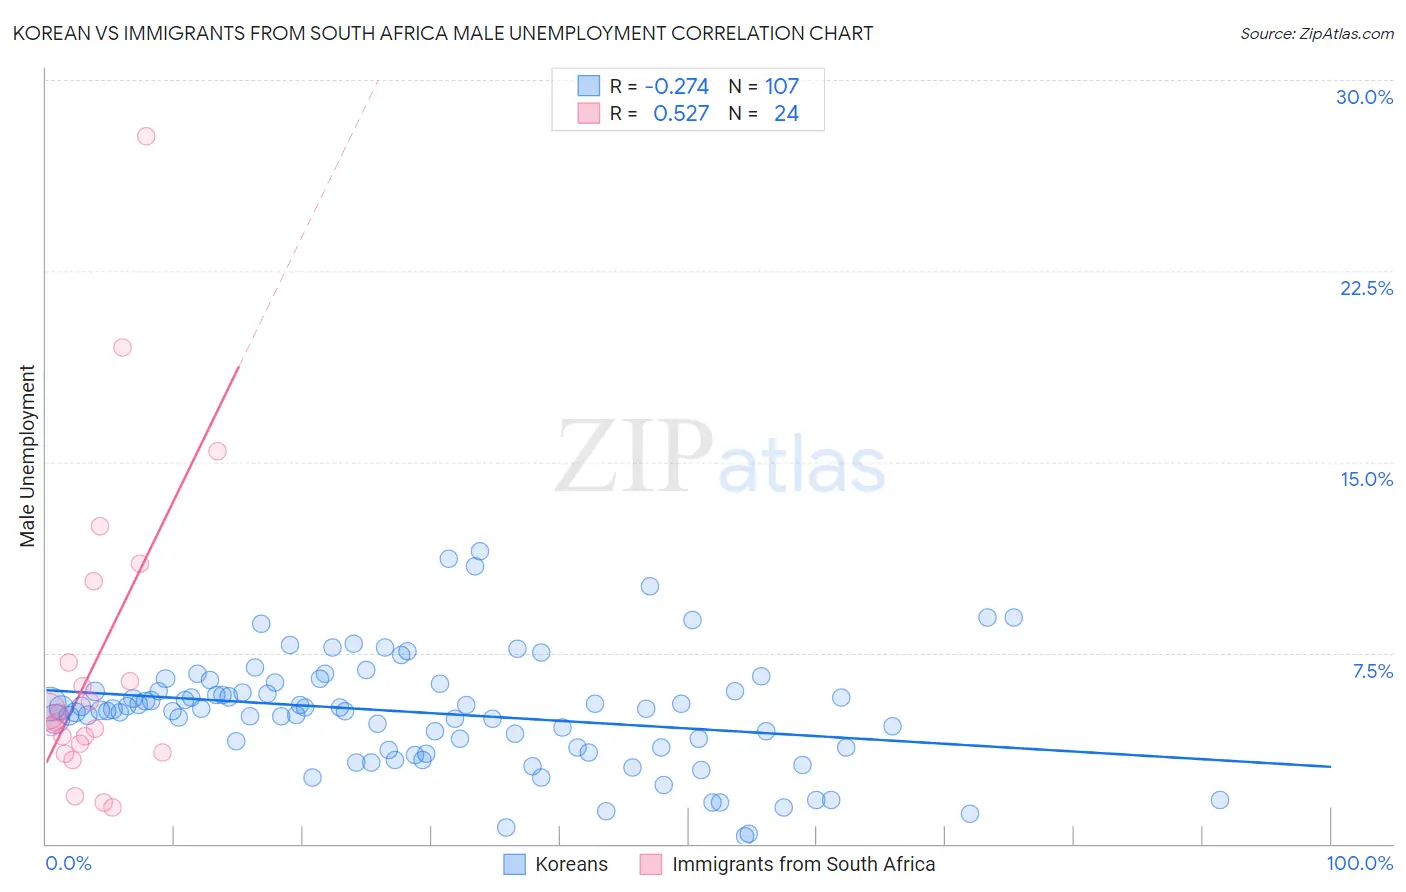 Korean vs Immigrants from South Africa Male Unemployment